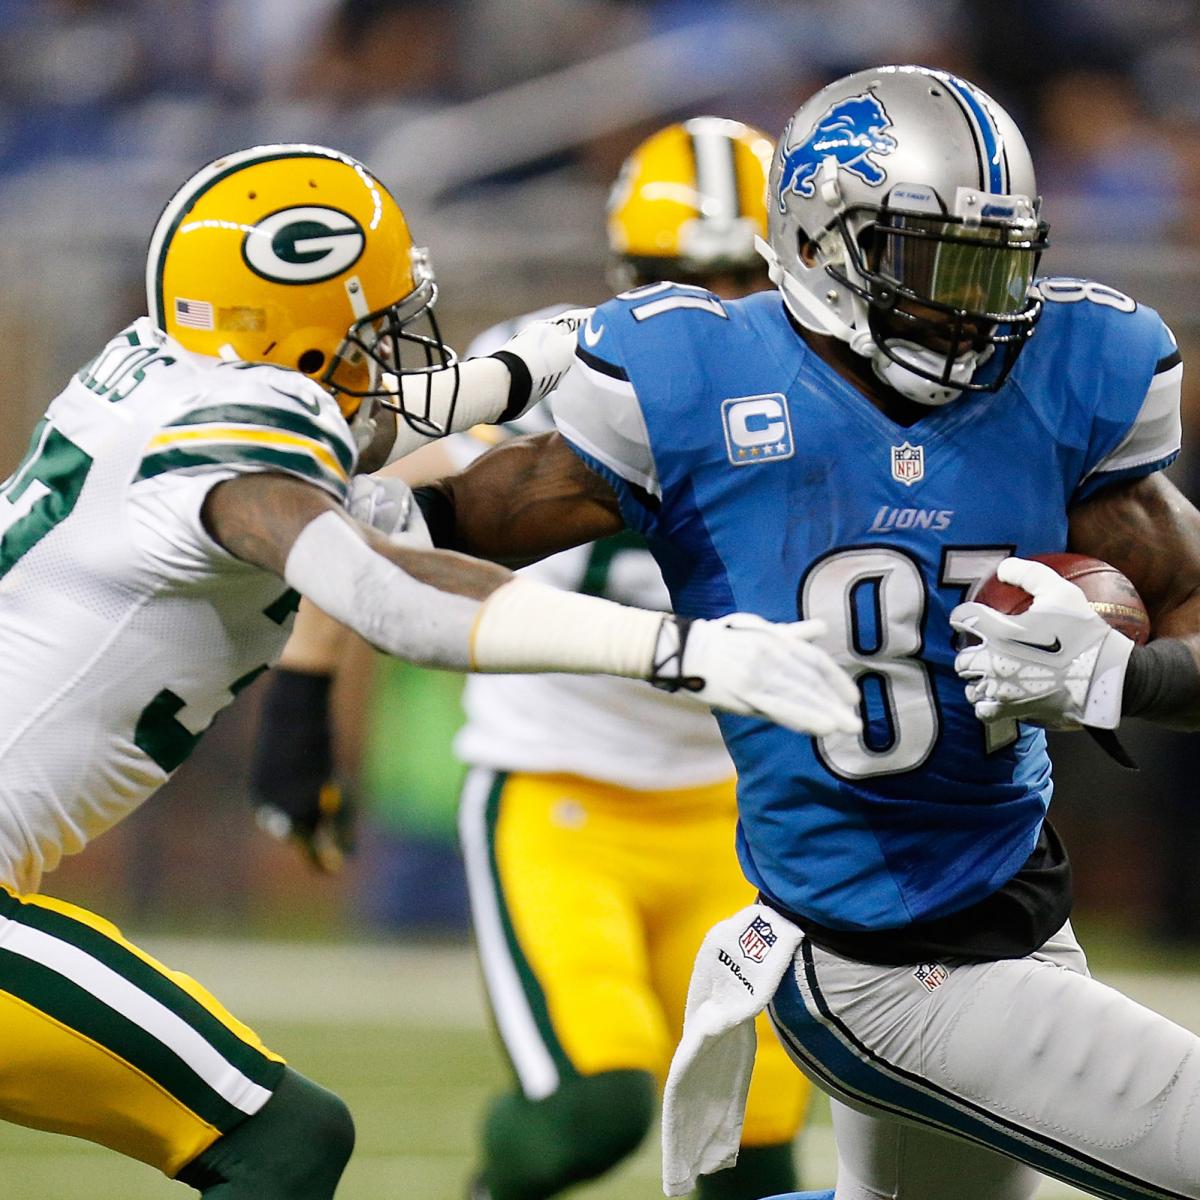 Lions-Packers hits four-year Week 6 high on ESPN - Sports Media Watch